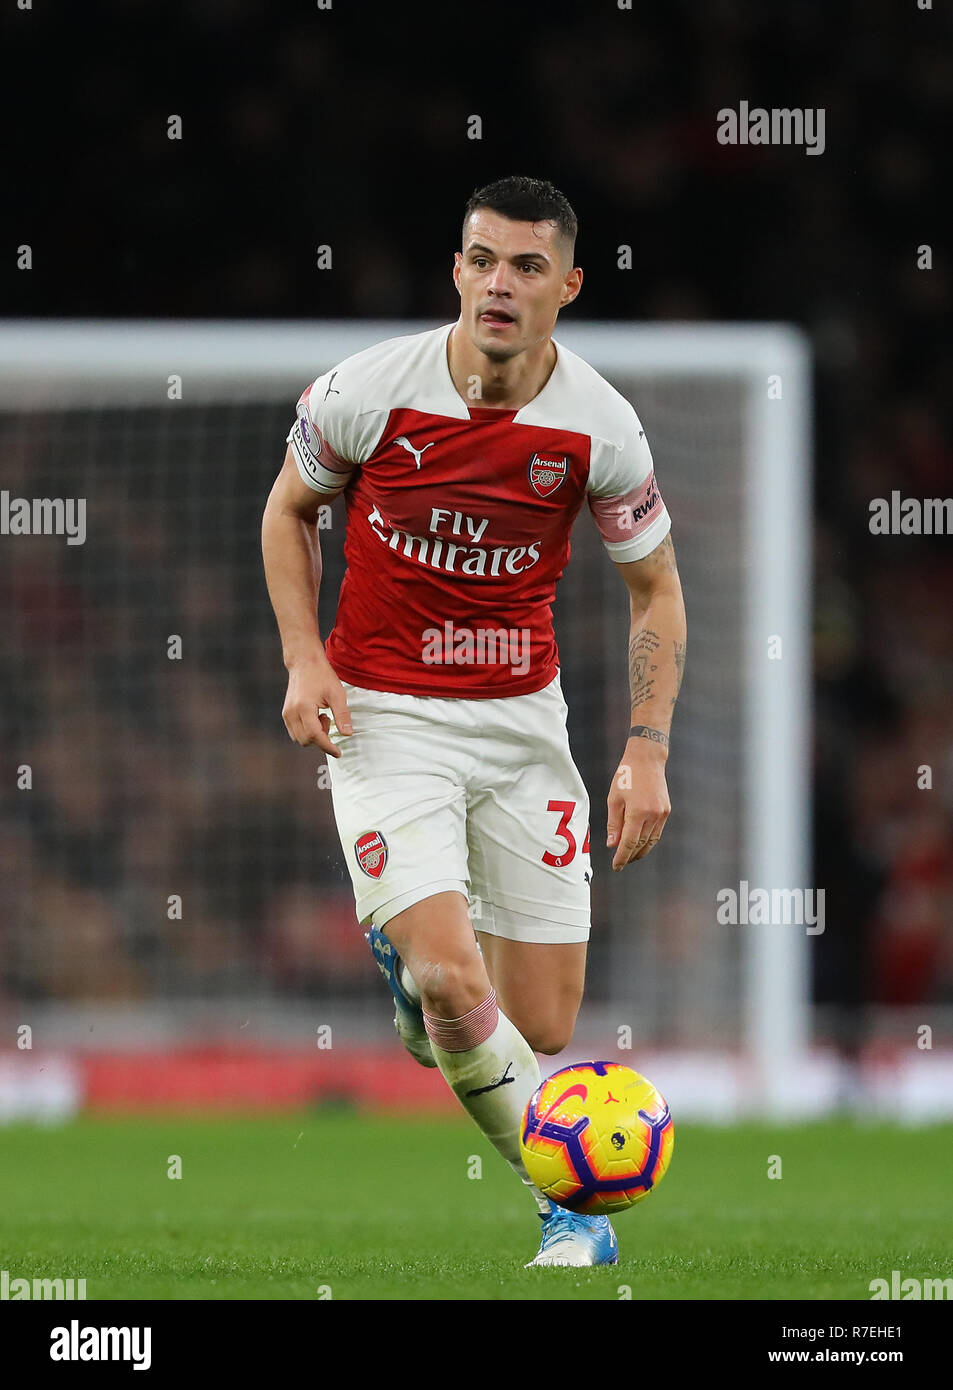 London, UK. 8th Dec 2018. Granit Xhaka of Arsenal - Arsenal v Huddersfield Town, Premier League, Emirates Stadium, London (Holloway) - 8th December 2018  Editorial Use Only - DataCo restrictions apply Credit: MatchDay Images Limited/Alamy Live NewsEditorial use only, license required for commercial use. No use in betting, Credit: MatchDay Images Limited/Alamy Live News Stock Photo